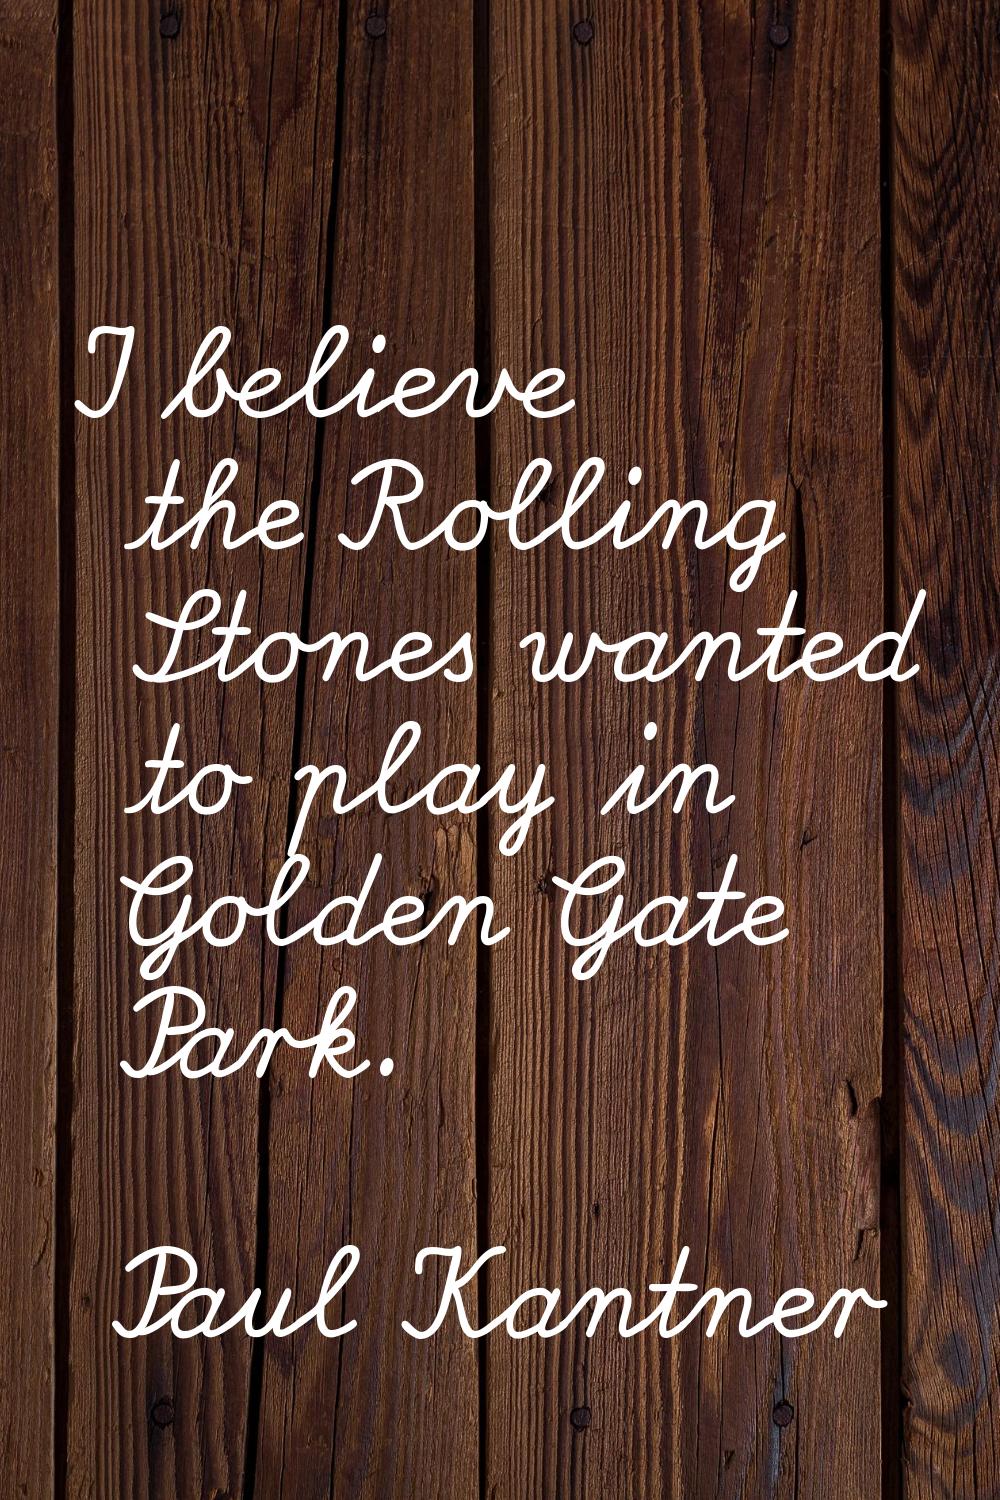 I believe the Rolling Stones wanted to play in Golden Gate Park.